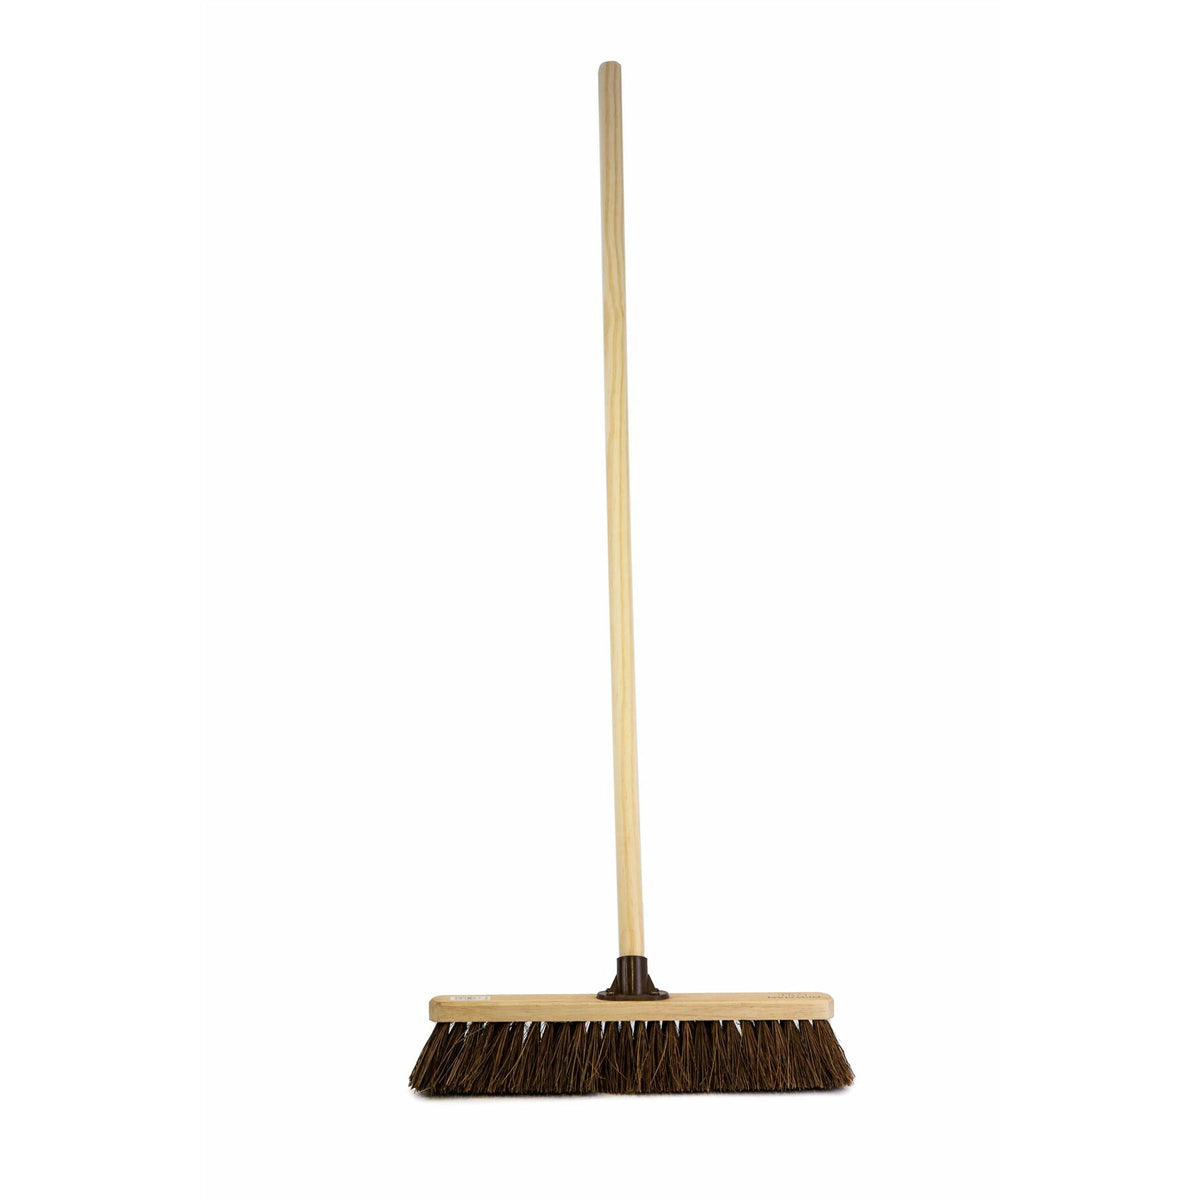 Newman and Cole 18" Natural Bassine Broom Head with Plastic Bracket Supplied with Handle